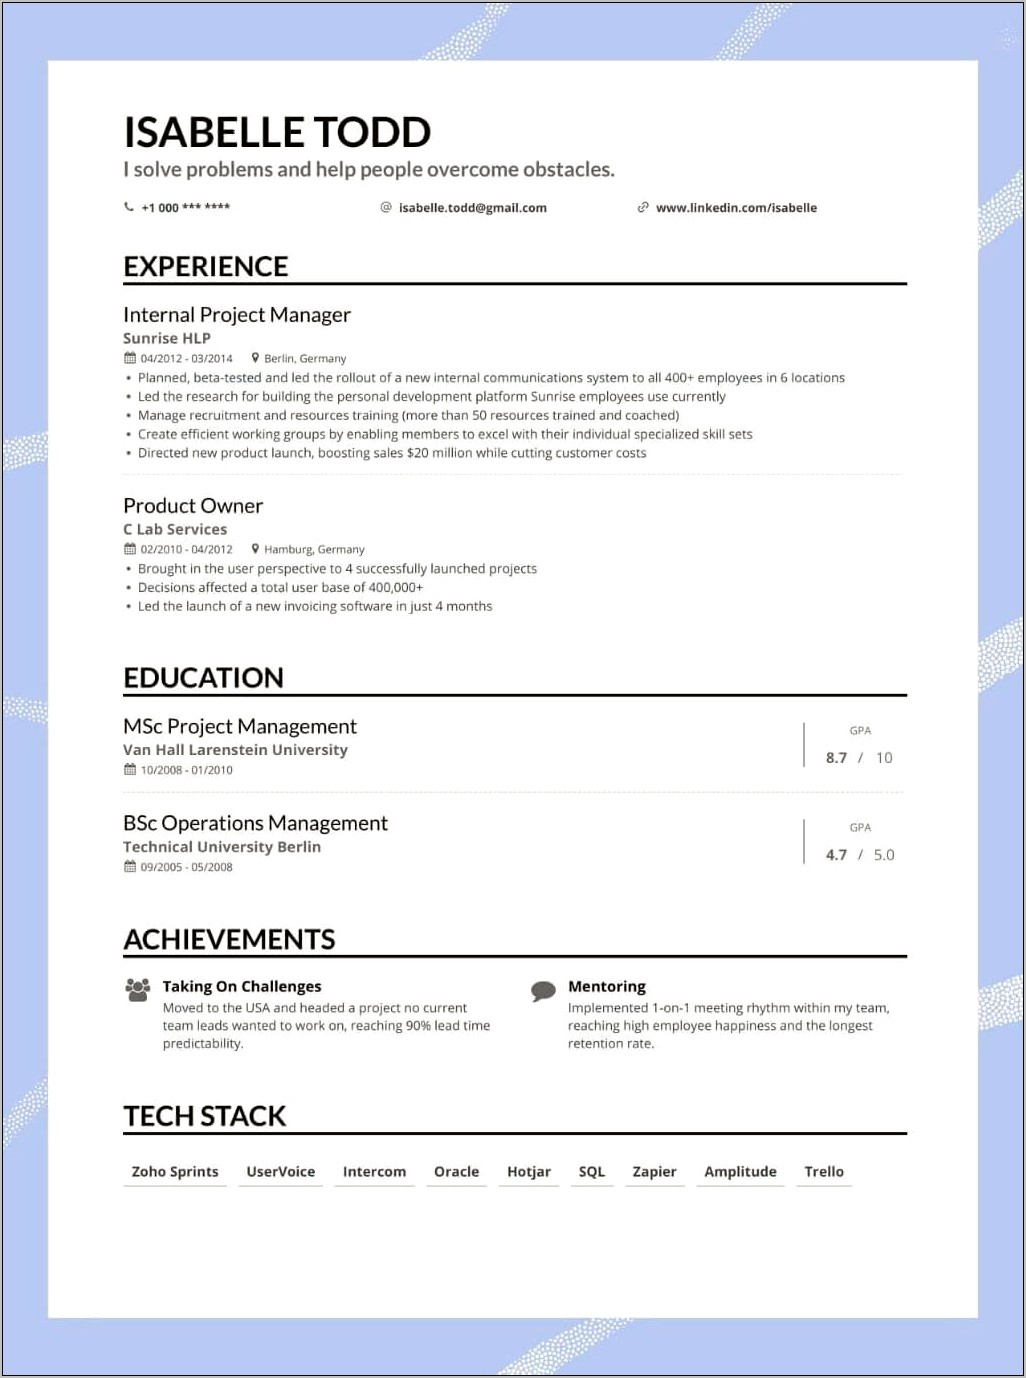 Resume Work Experience Past Or Present Tense